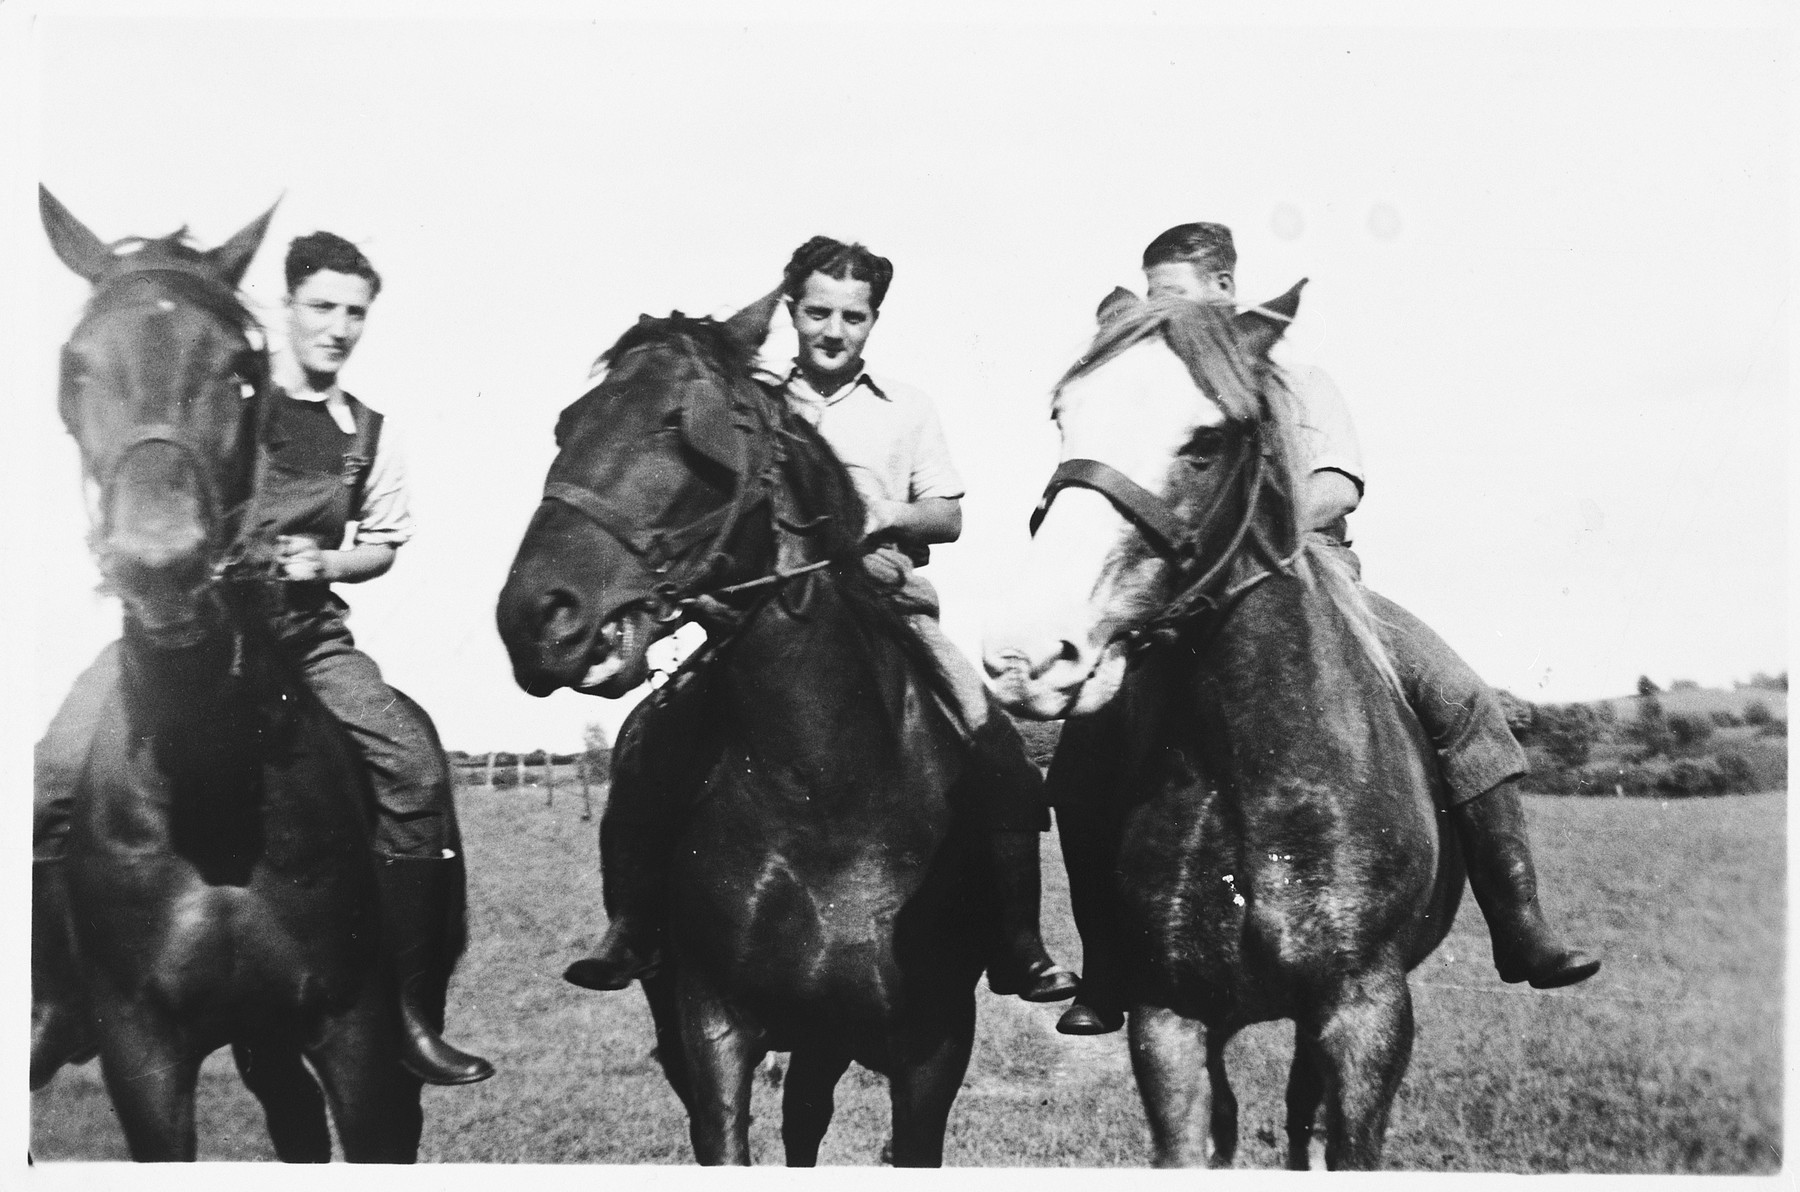 Three young Jewish refugees from Germany ride horses on a farm in the Jutland, where members of their hachshara [Zionist collective] are working.